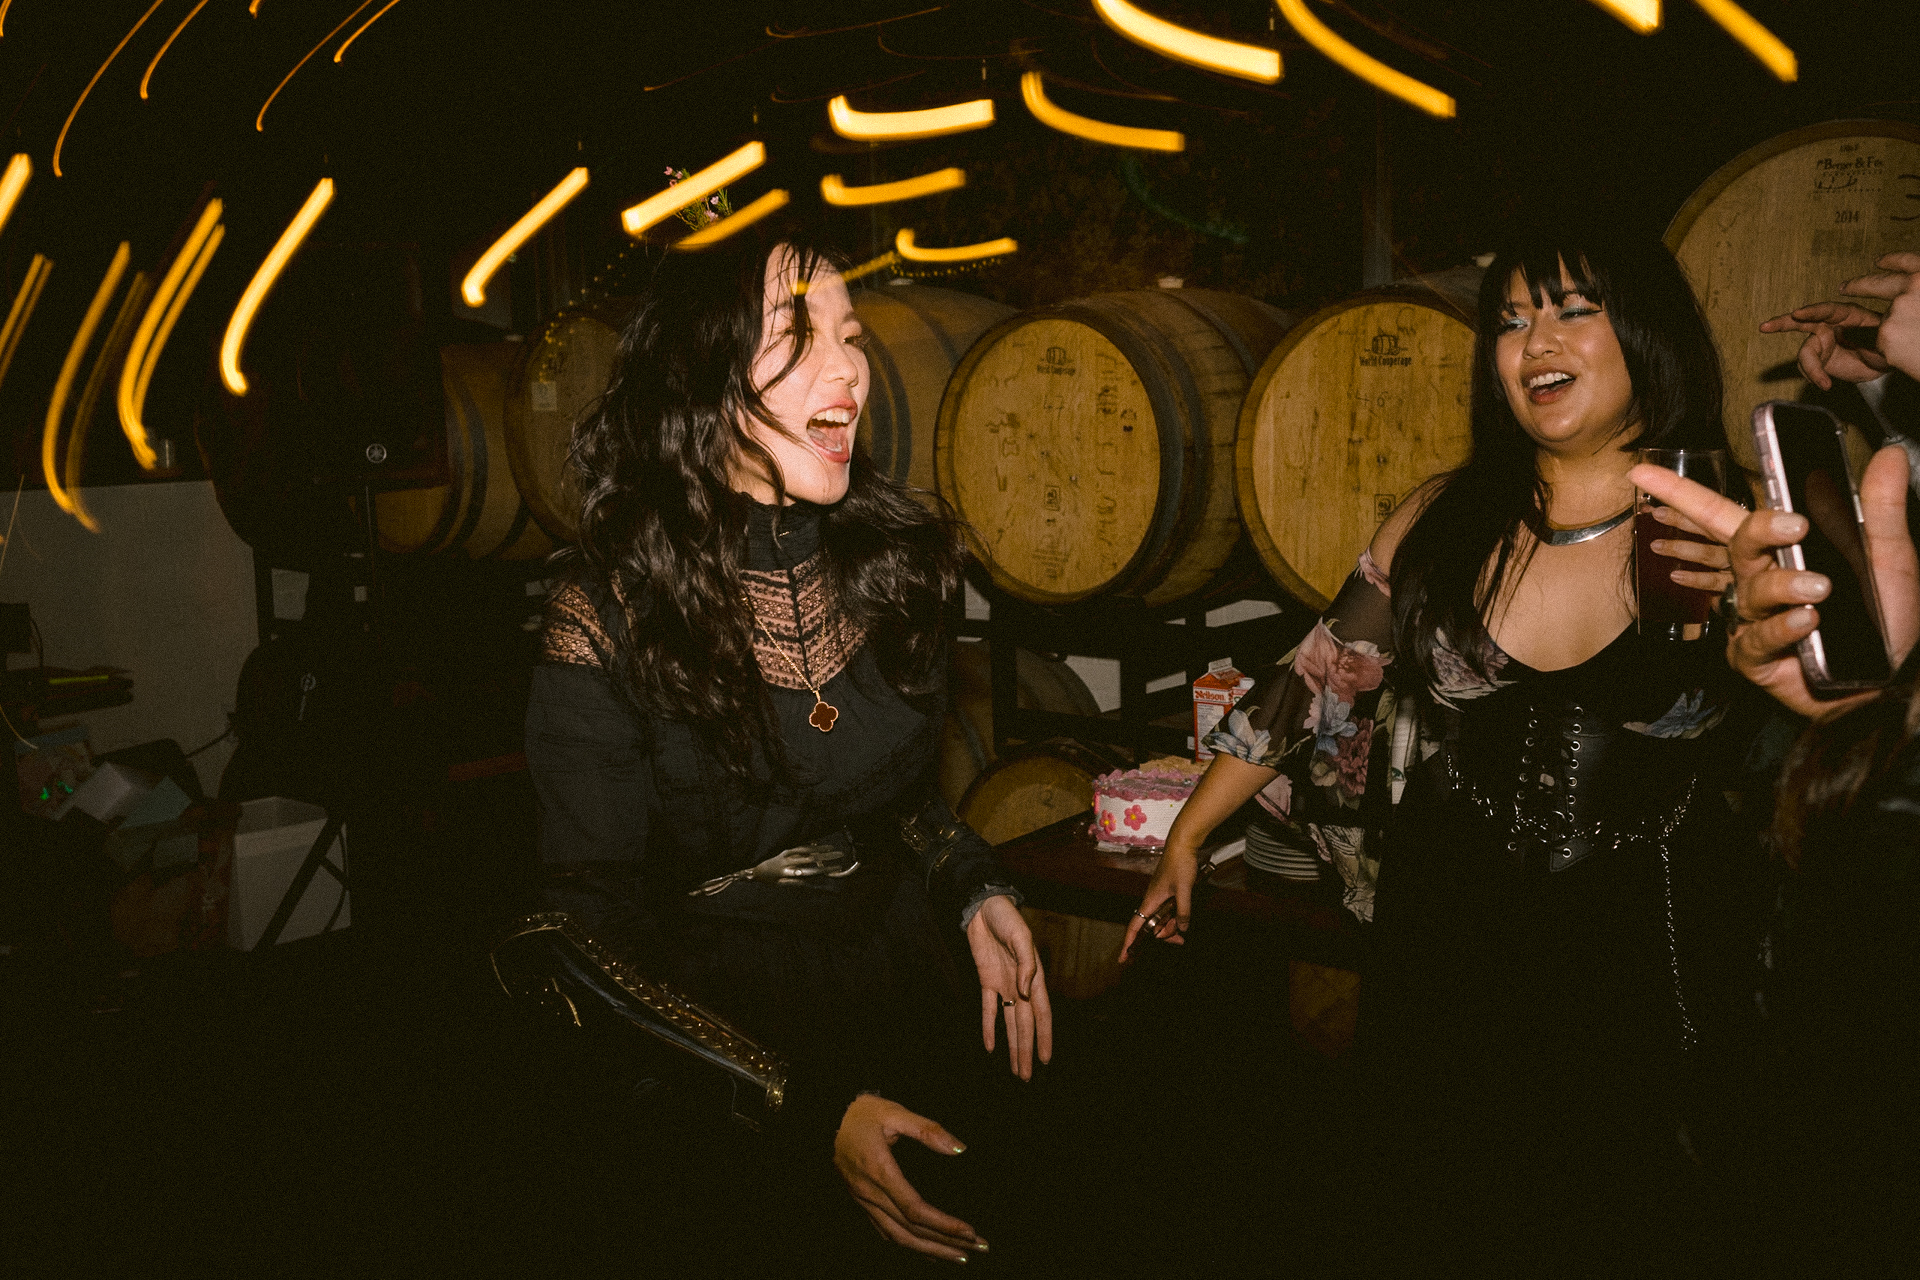 Bride and her friends laughing and enjoying themselves at a social event with wooden barrels in the background and ambient lighting.